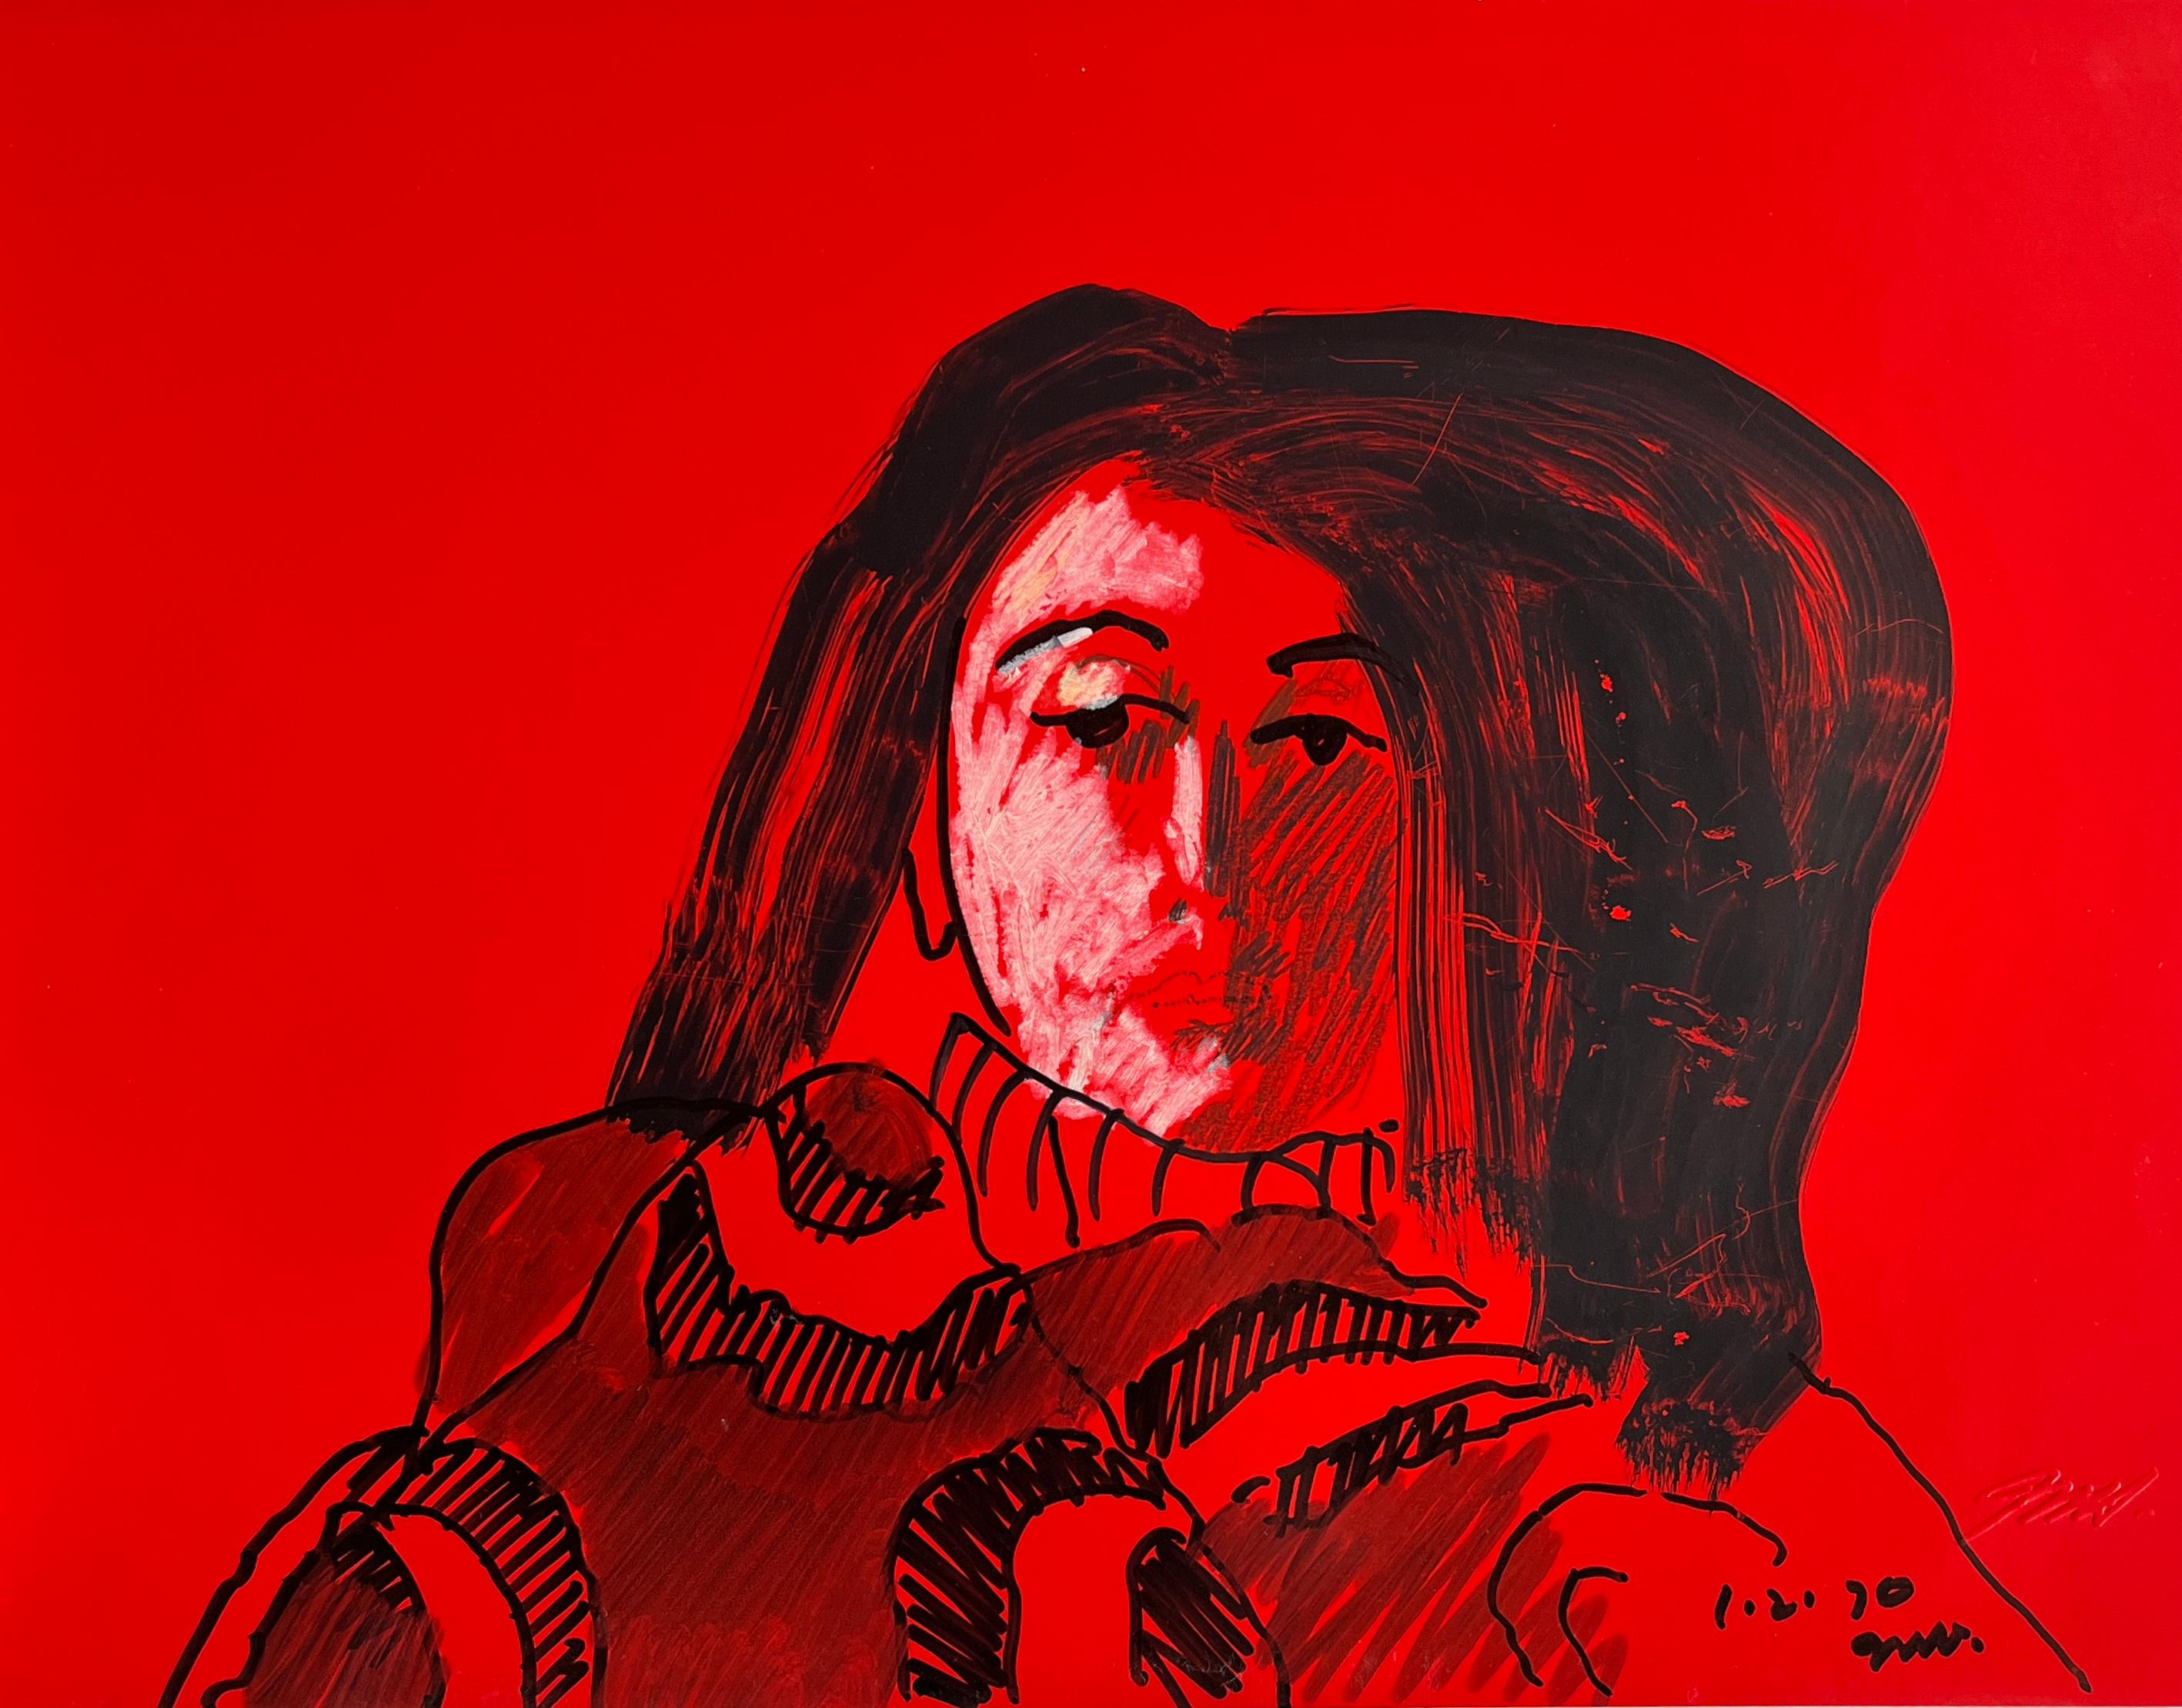 Jack Hooper
"Woman on Red"
1/2/1970
Gouache, ink and pencil on glossy, red paper
11"x8.5" unframed
Signed and dated in ink lower right

In the year 1970, Jack Hooper's artistic prowess shines through in a striking portrait of a woman. Using bold